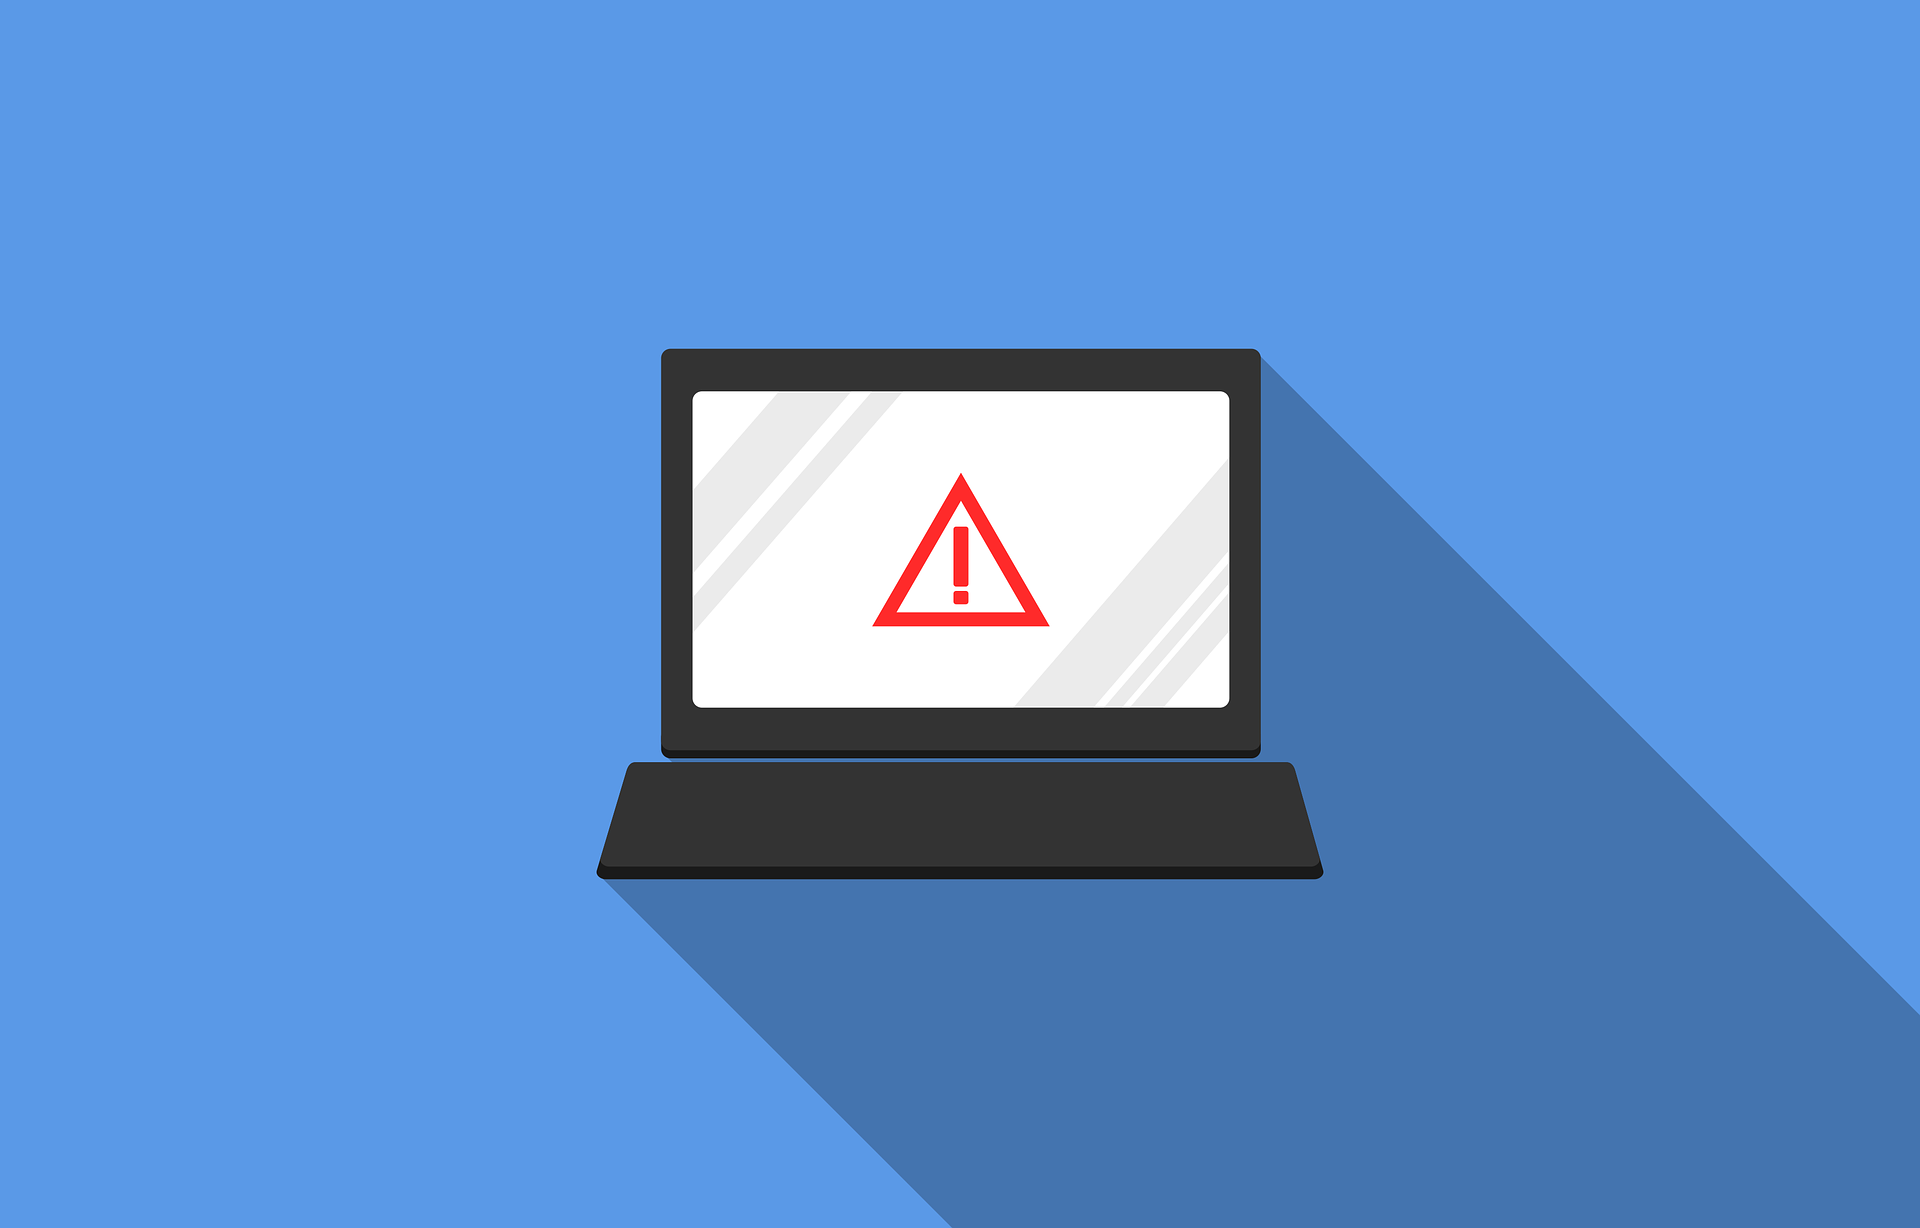 Office 365 email security breach